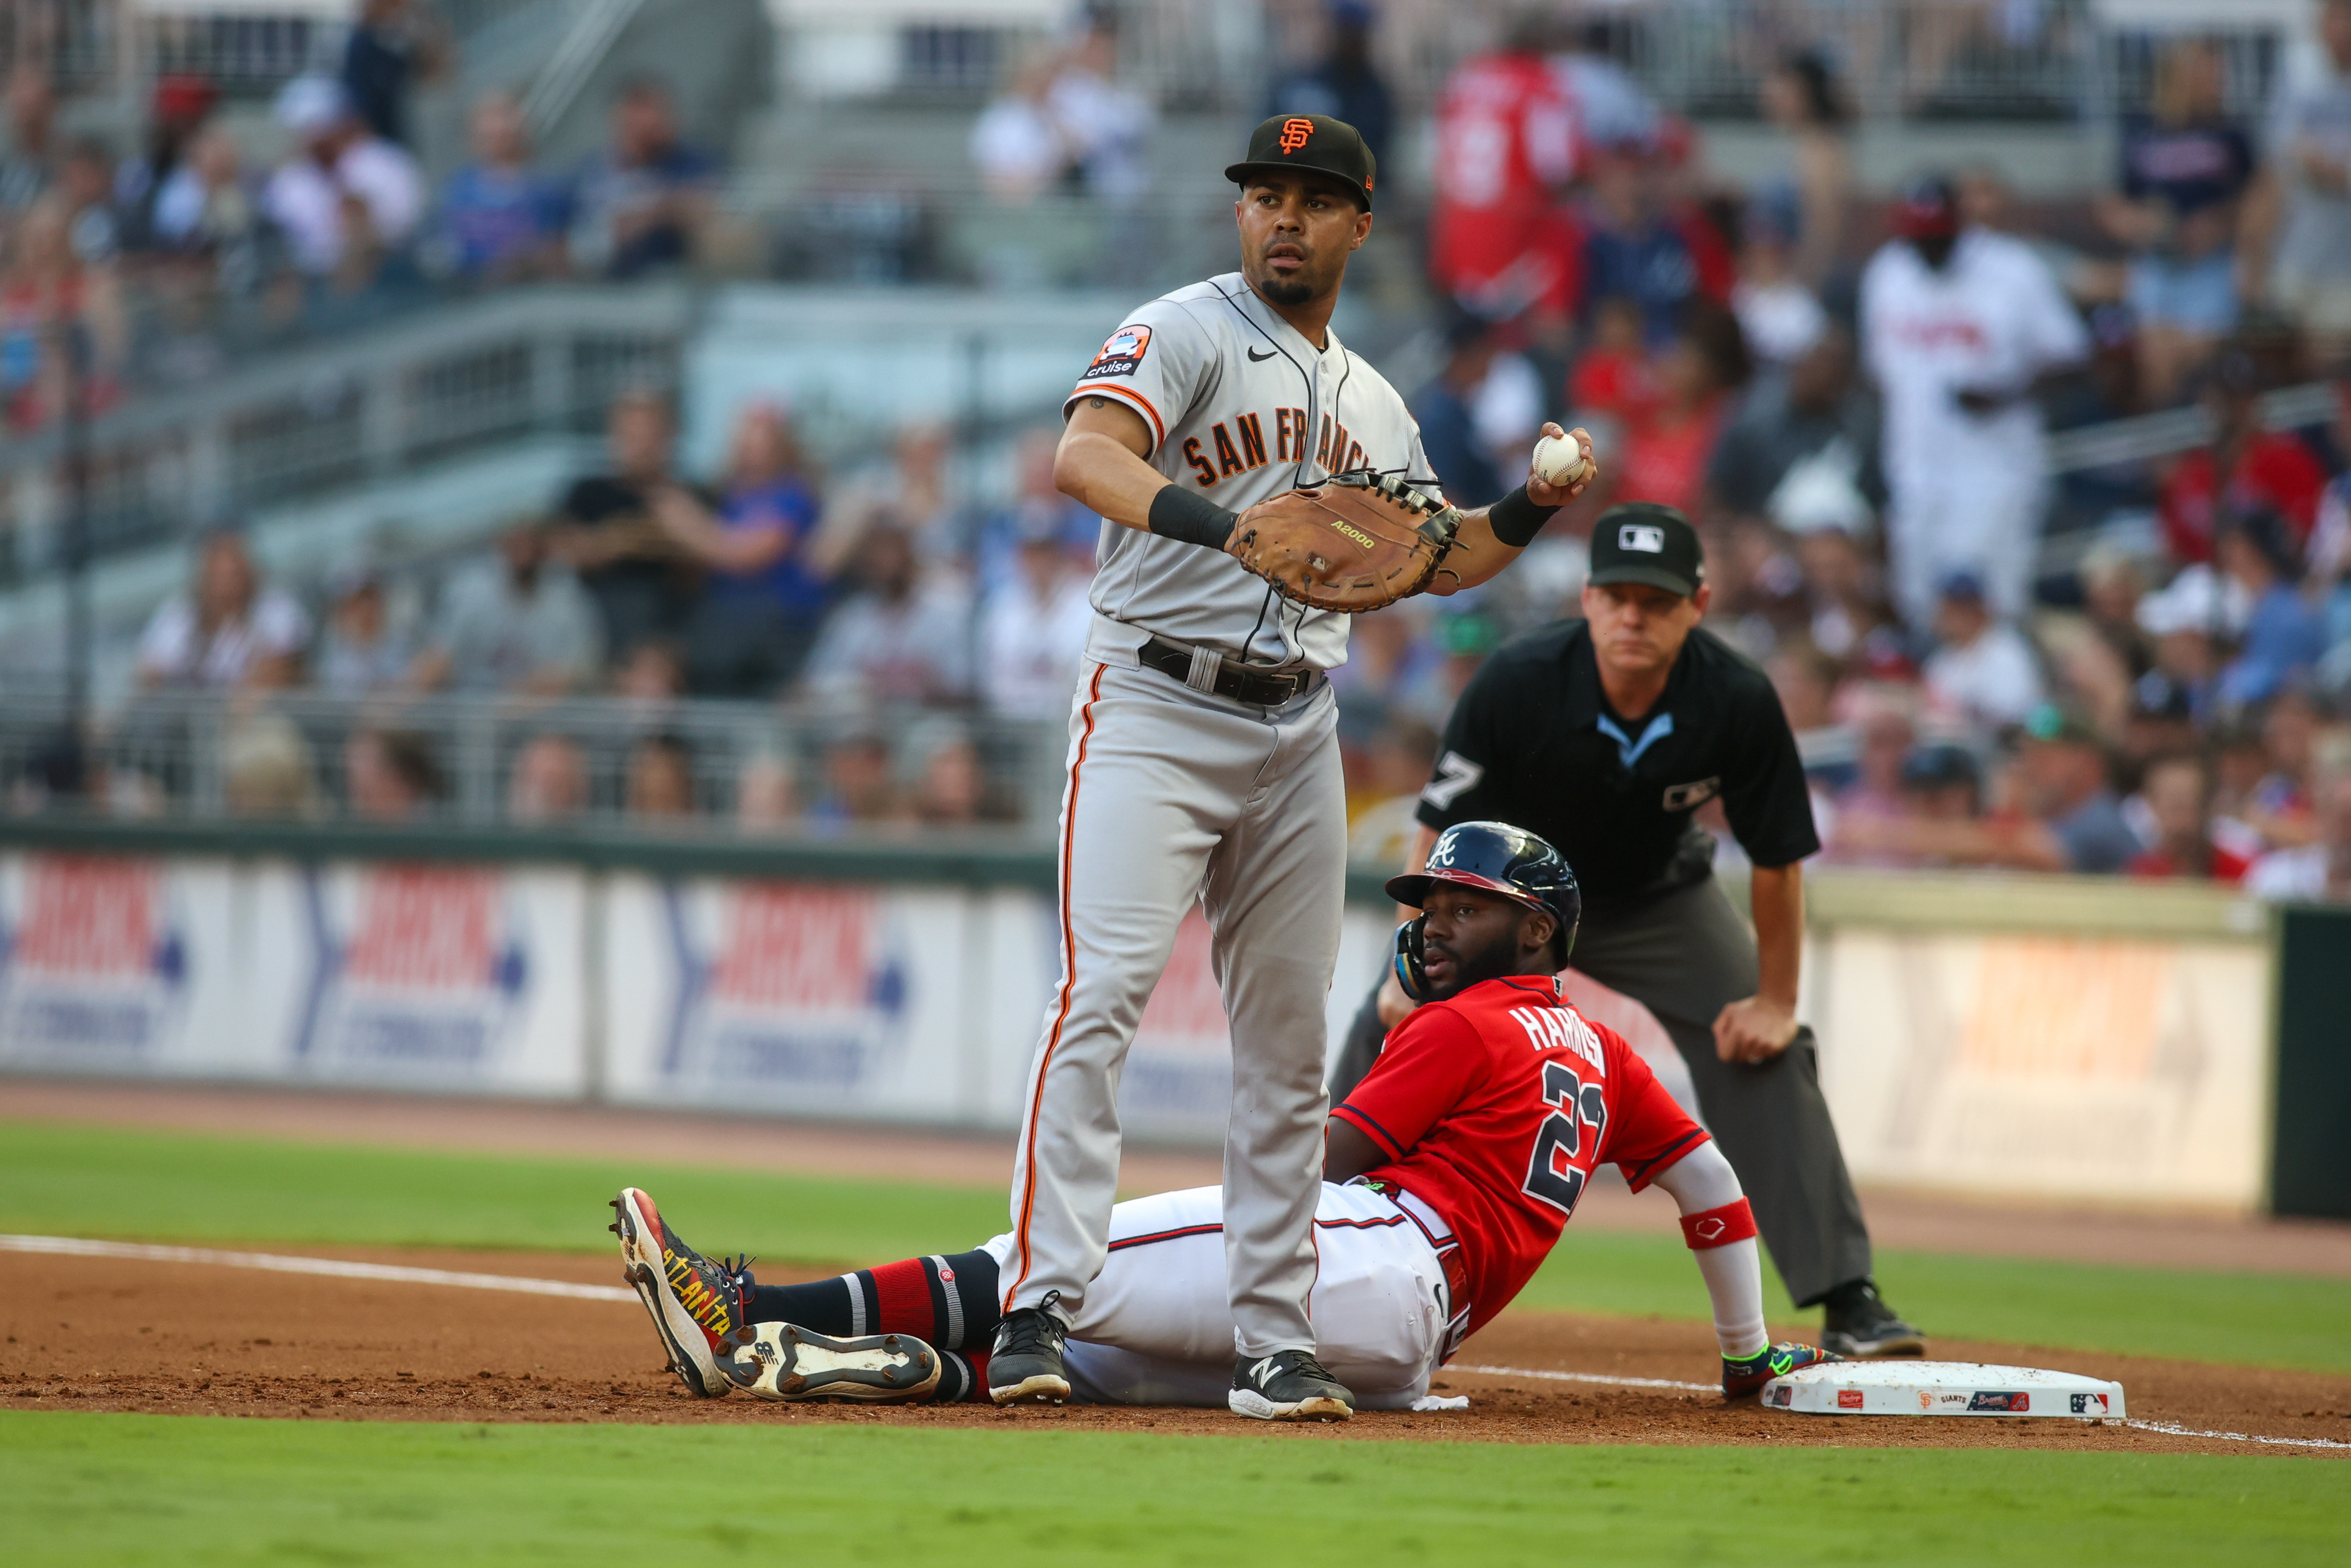 Strider strikes out 10 in 7 innings, Braves beat Giants 4-0 for 3rd  straight shutout - Newsday